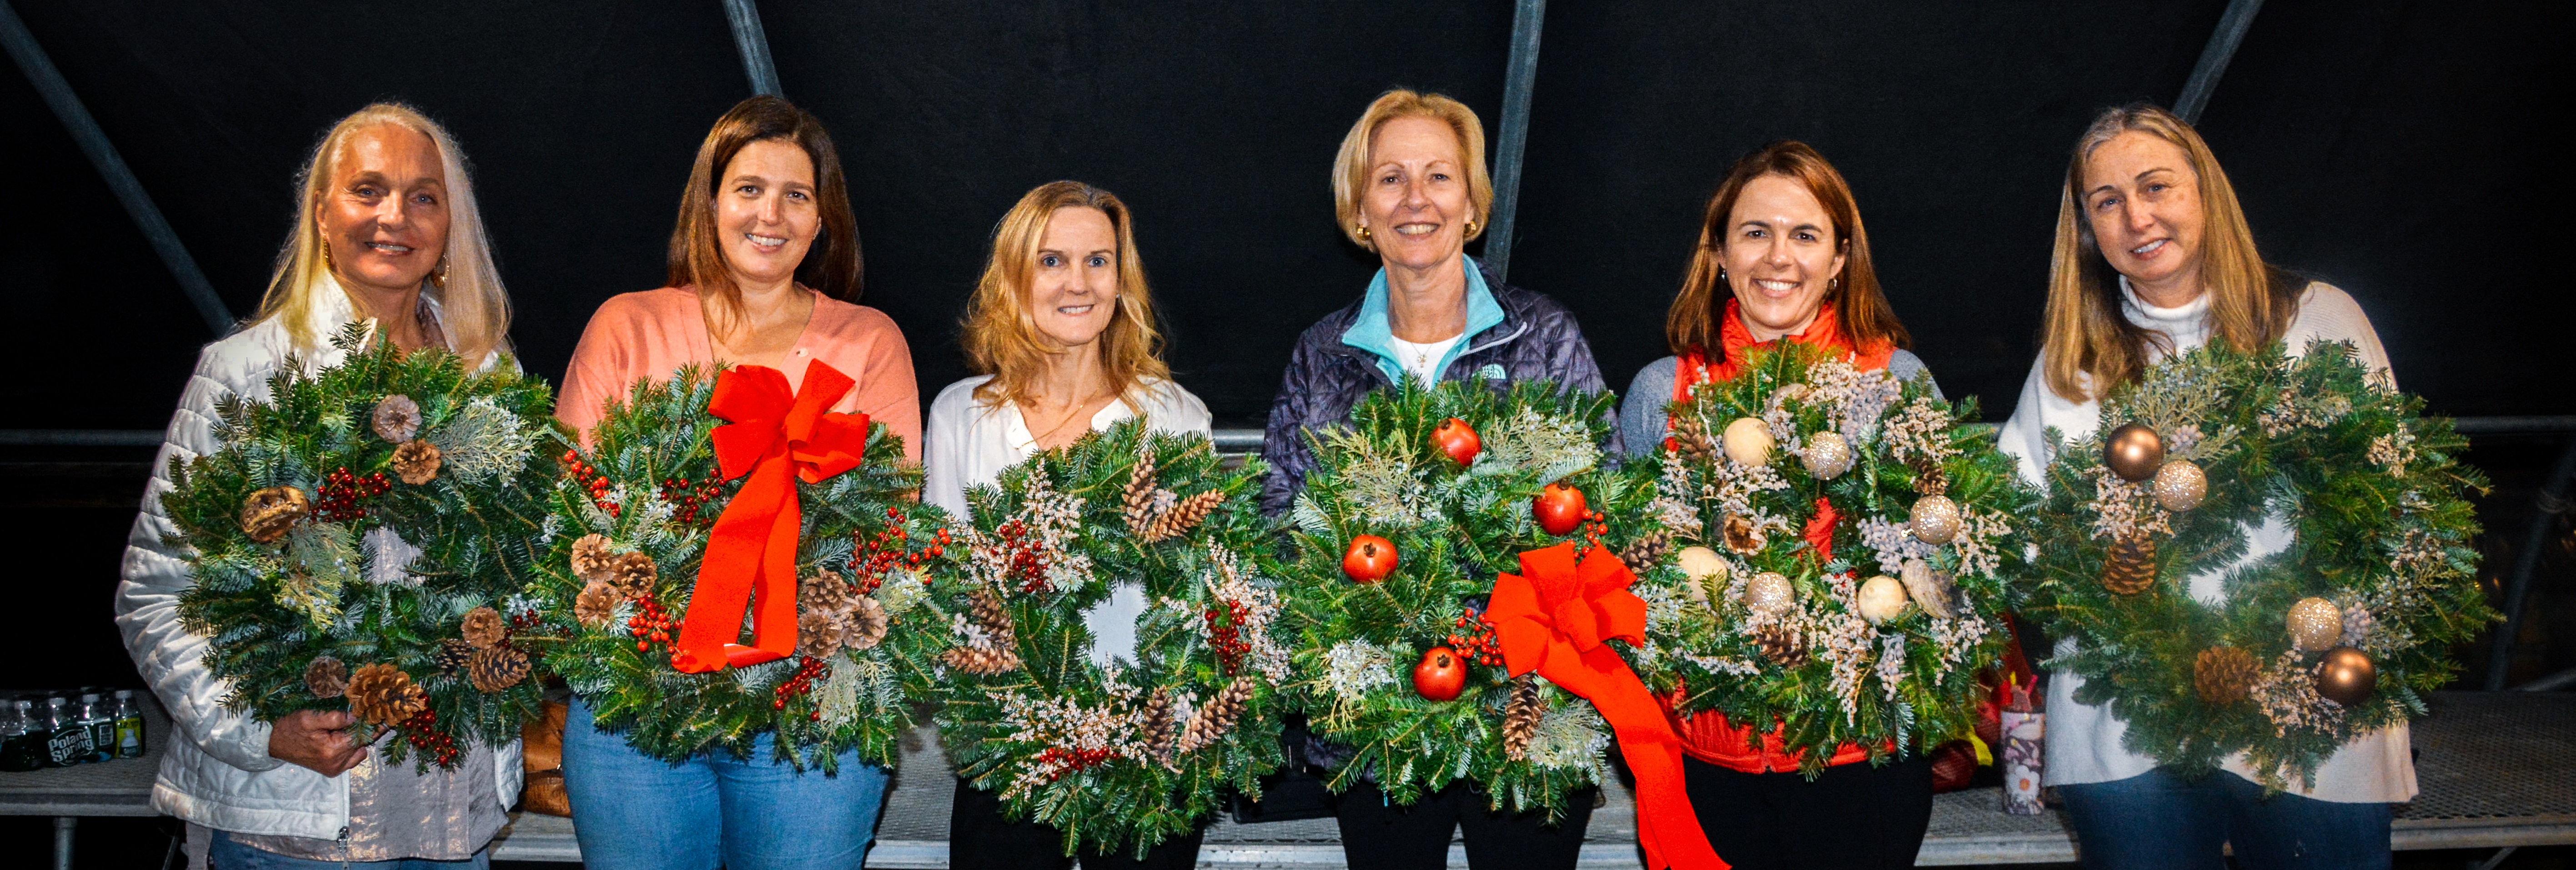 Previous year's attendees to our Wreath-Making class showing off their custom pieces to be displayed in their homes for the holiday season.